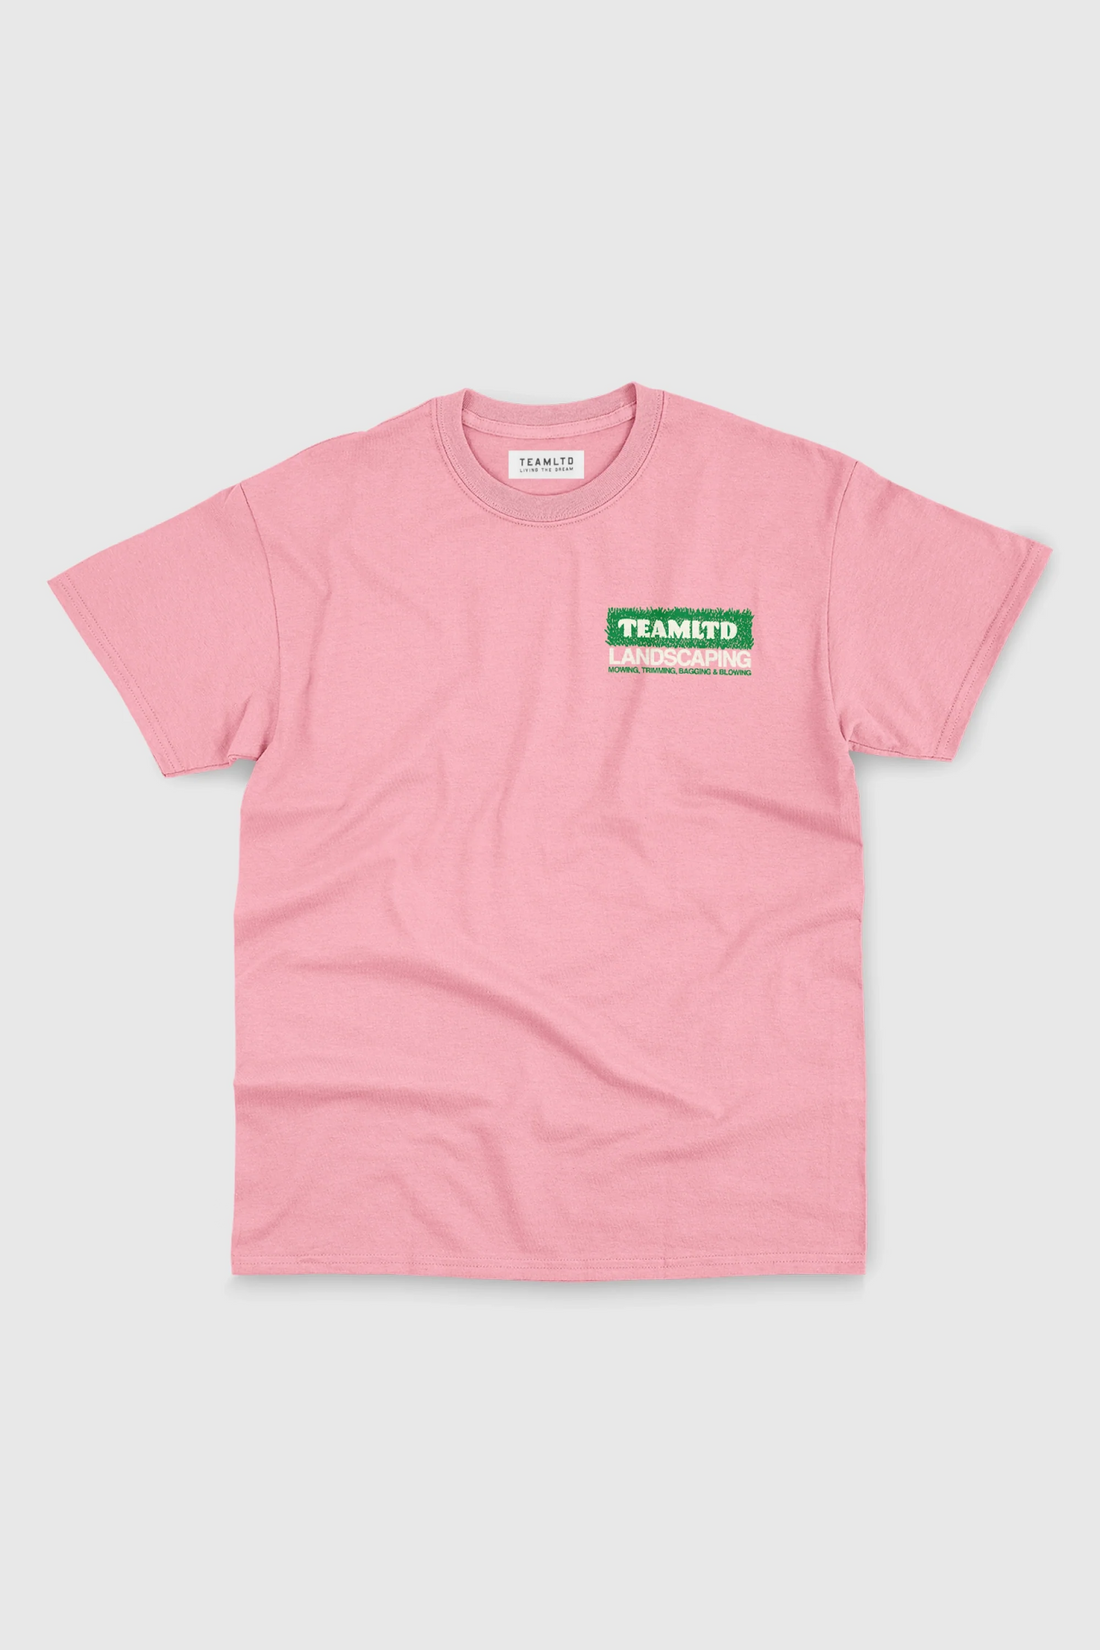 Landscaping Tee